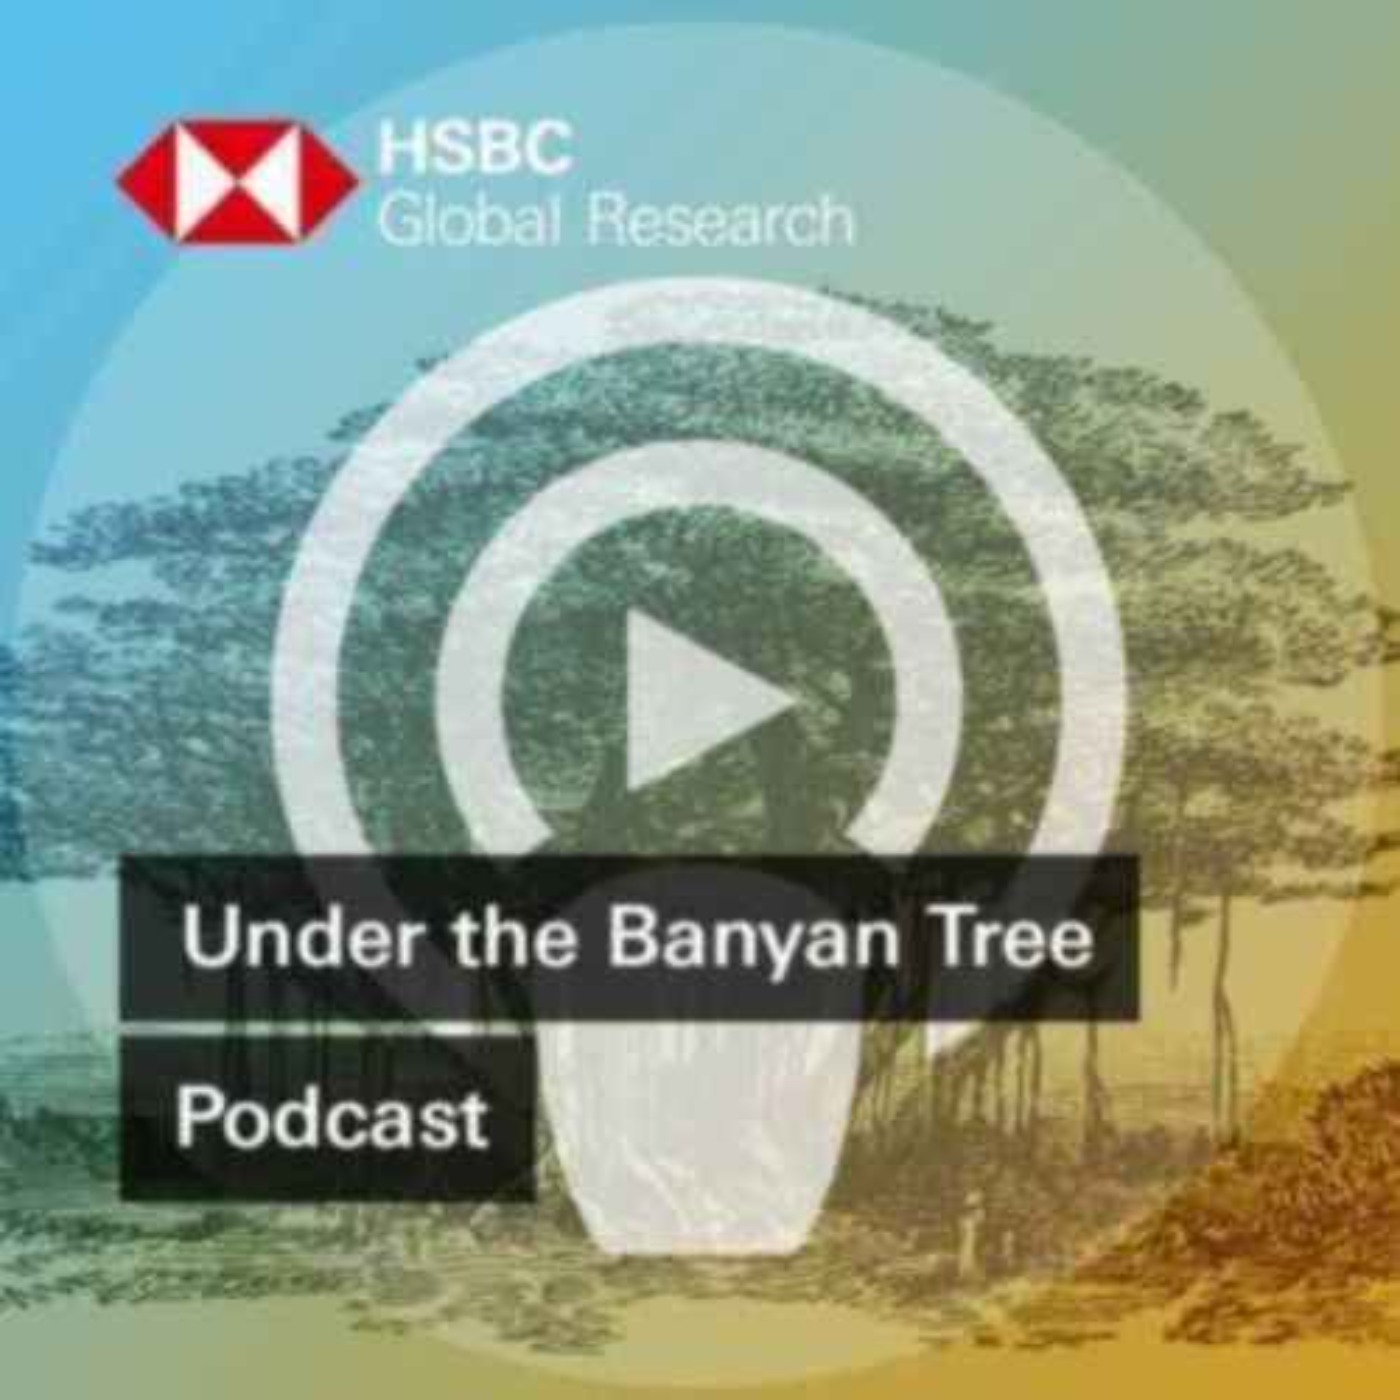 Under the Banyan Tree - China and global AI rollout